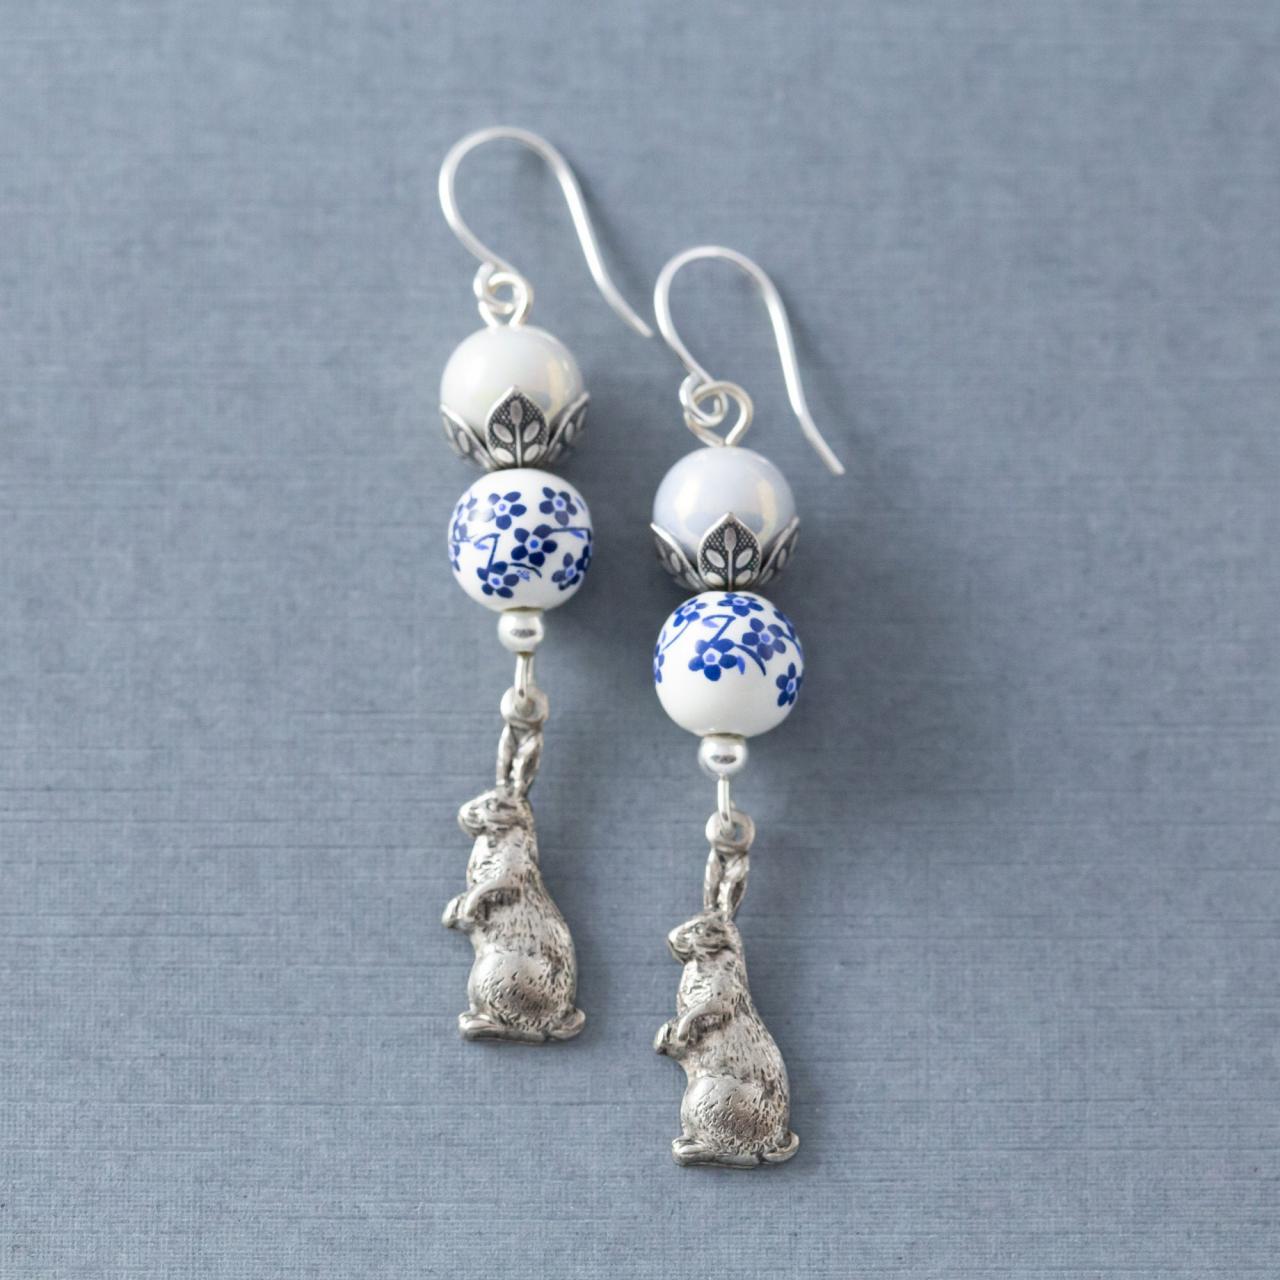 Silver Tone Rabbit Earrings With Blue And White Flower Beads, Rabbit Jewelry, Bunny Jewelry